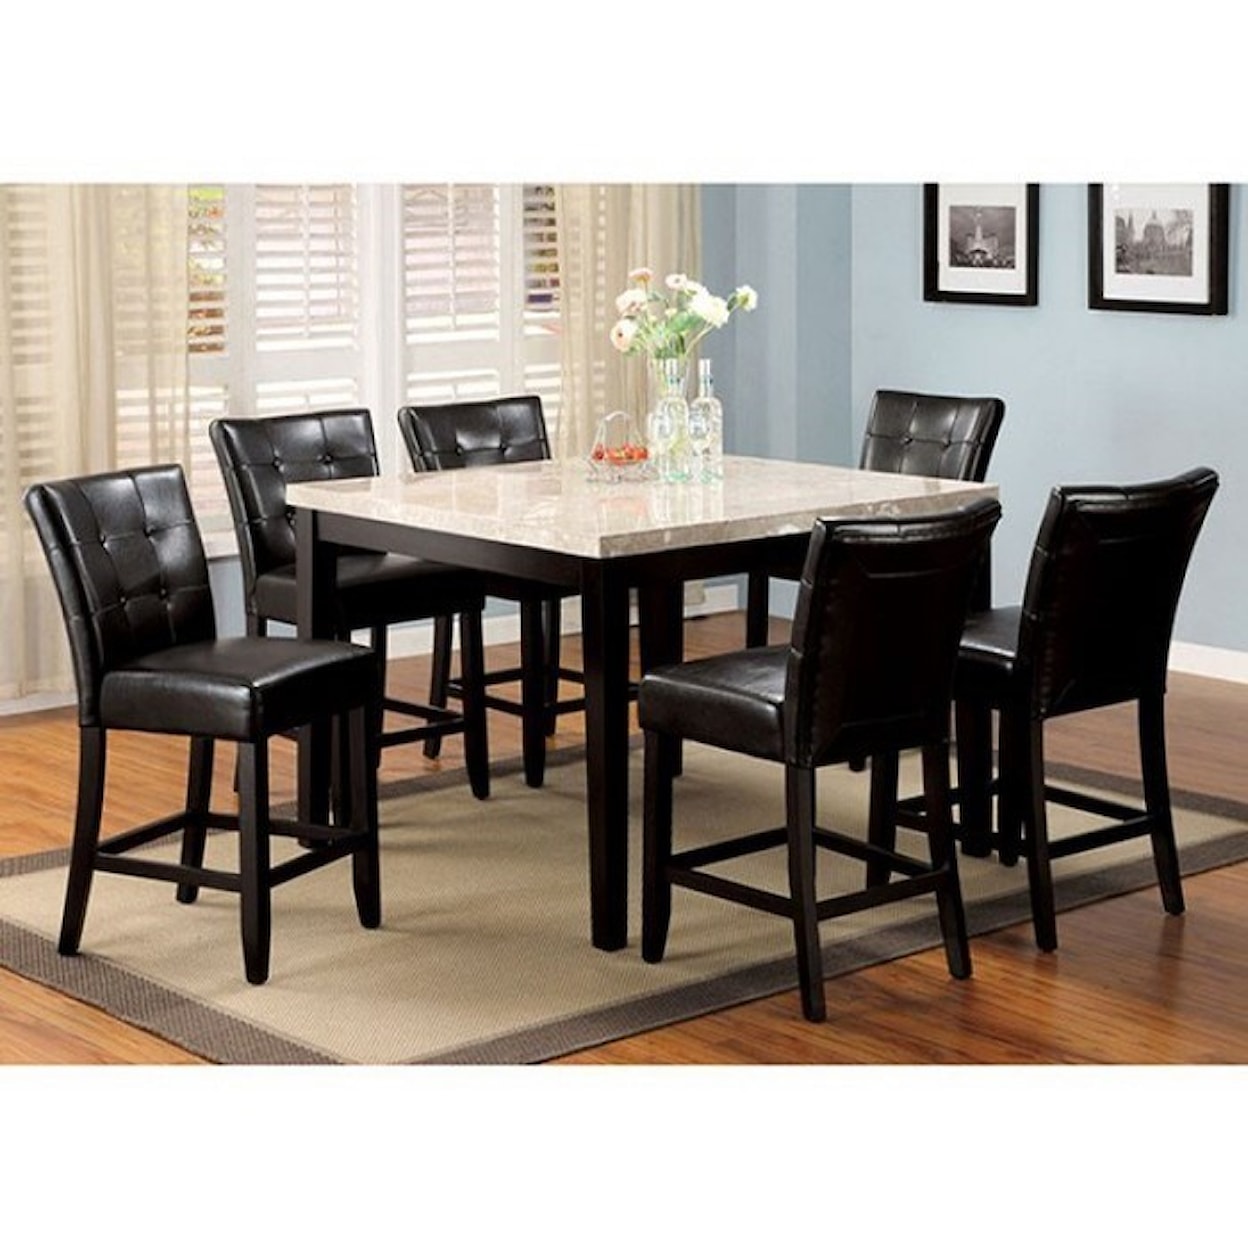 Furniture of America Marion II Counter Height Table and 6 Chairs